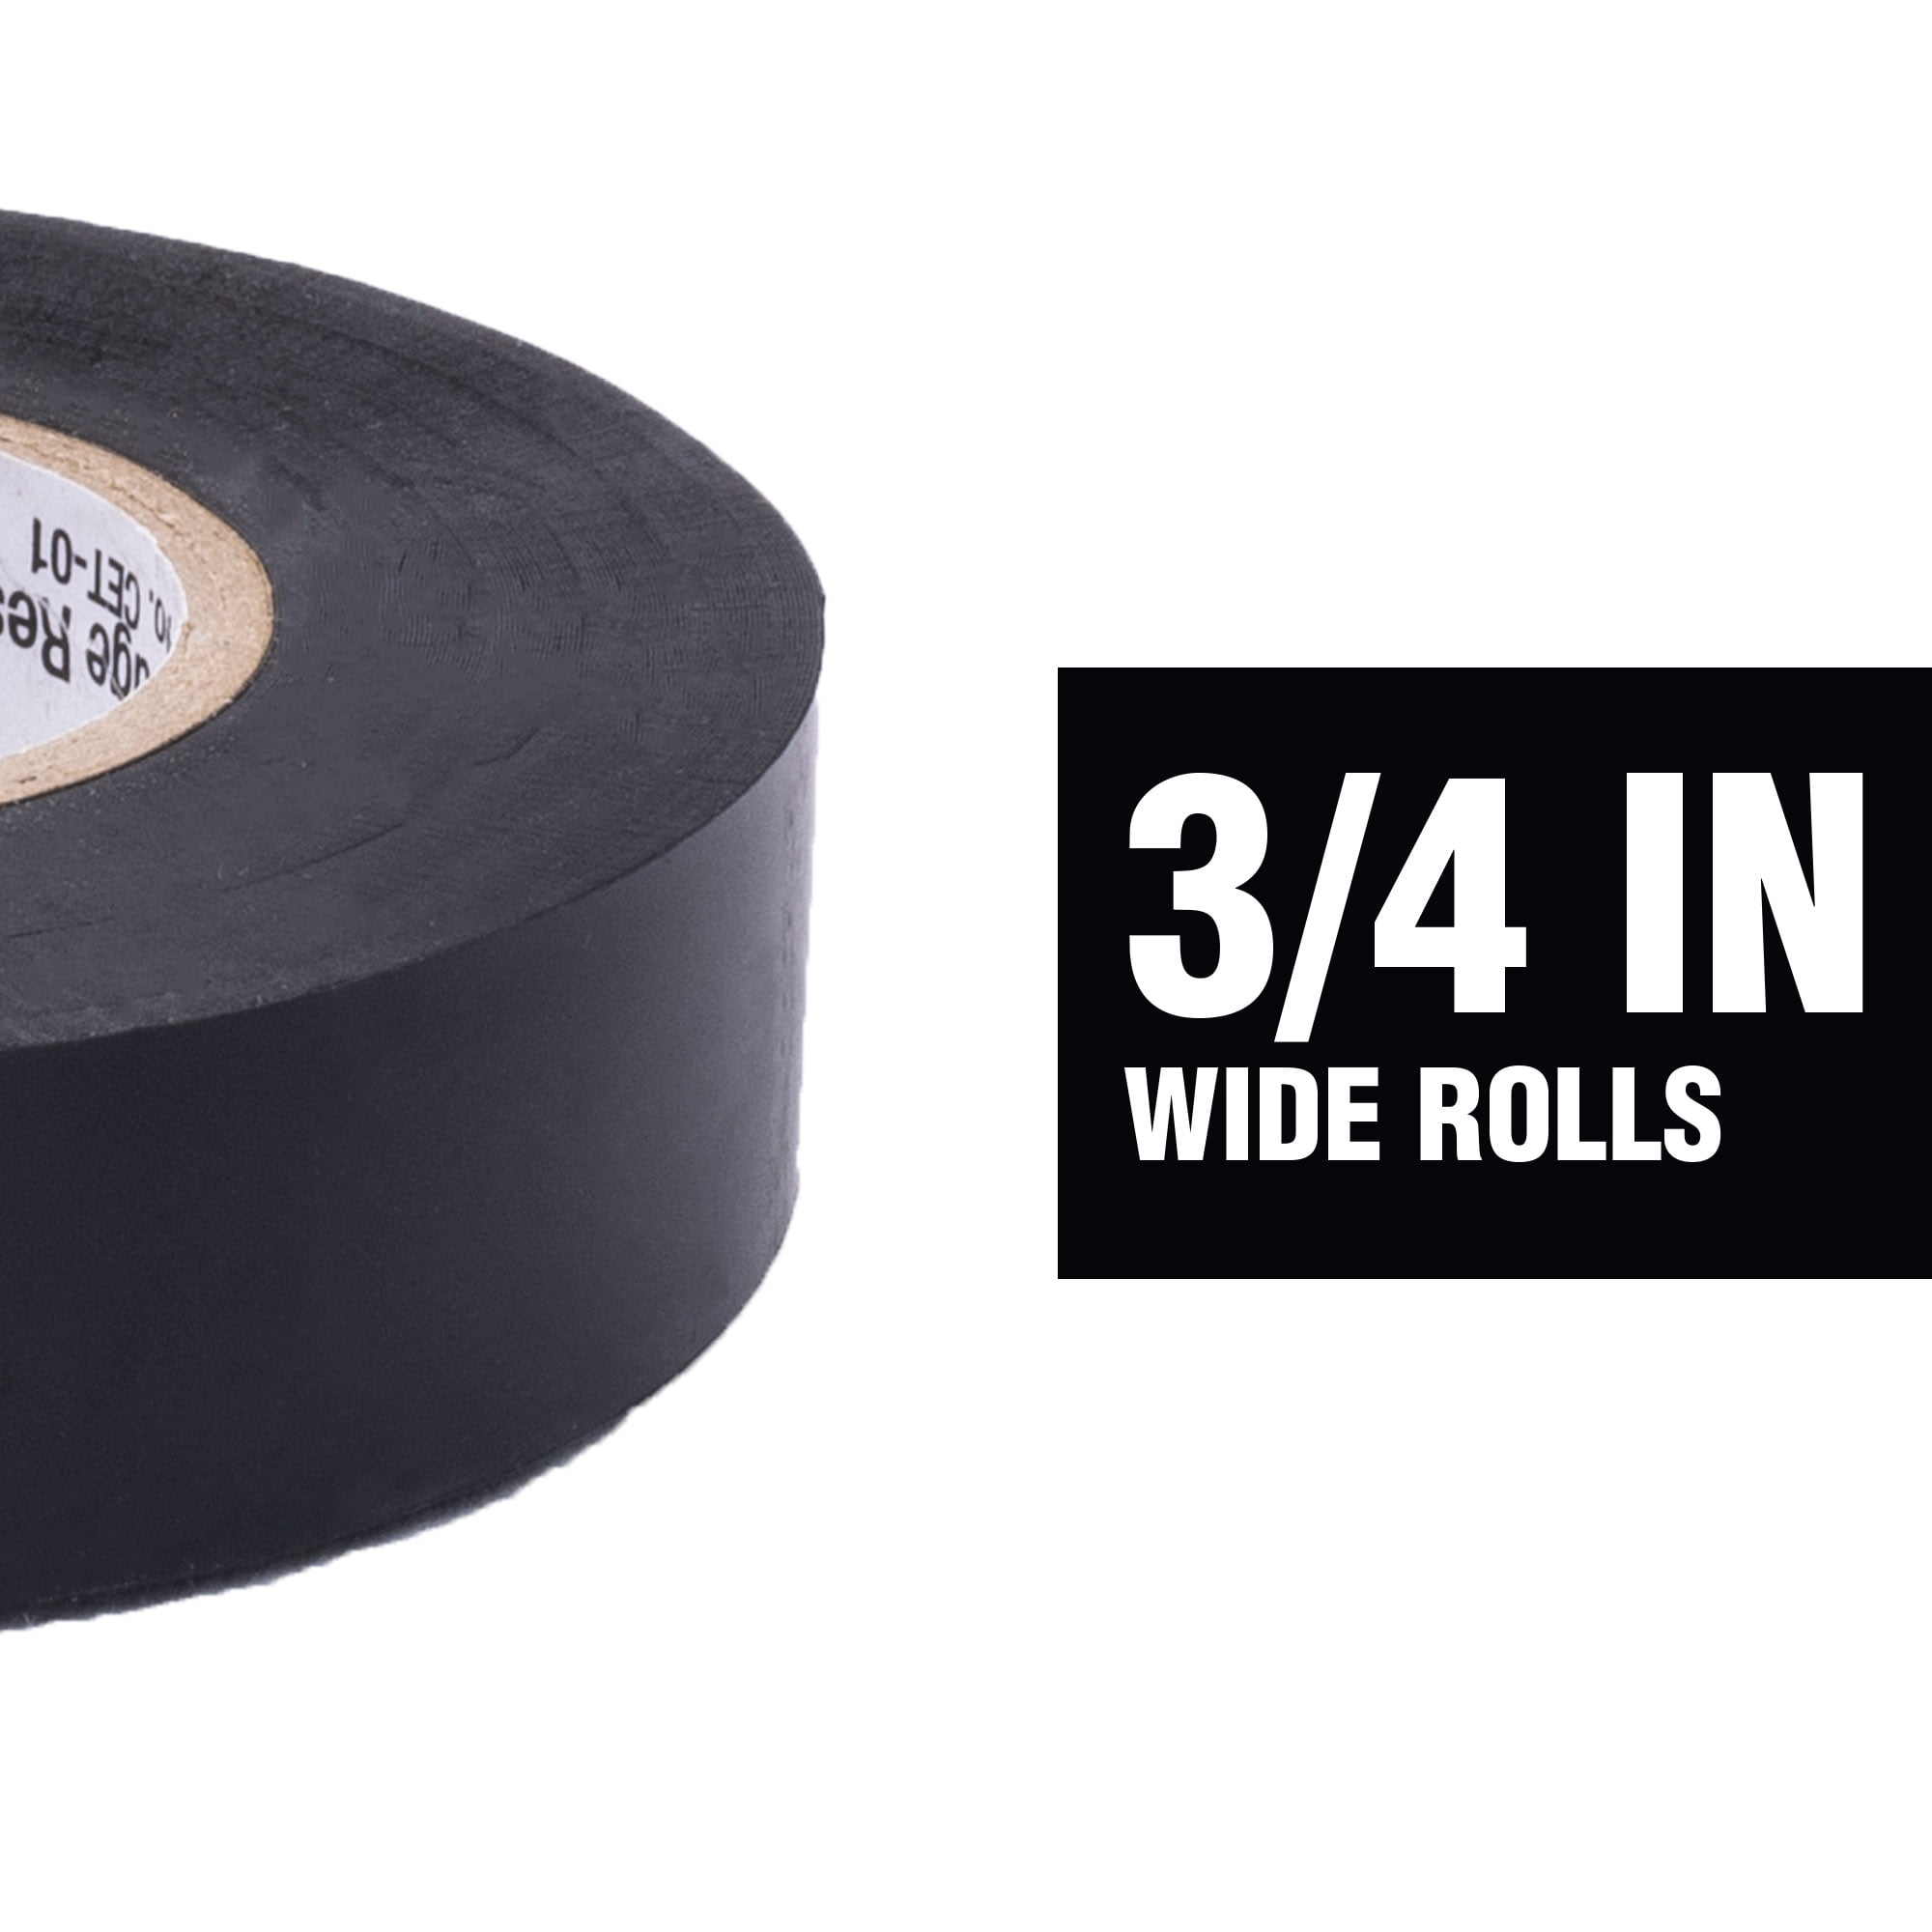 1-Roll BYBON Vinyl Electrical Tape,White,3/4 in x 60 ft UL-Listed, 